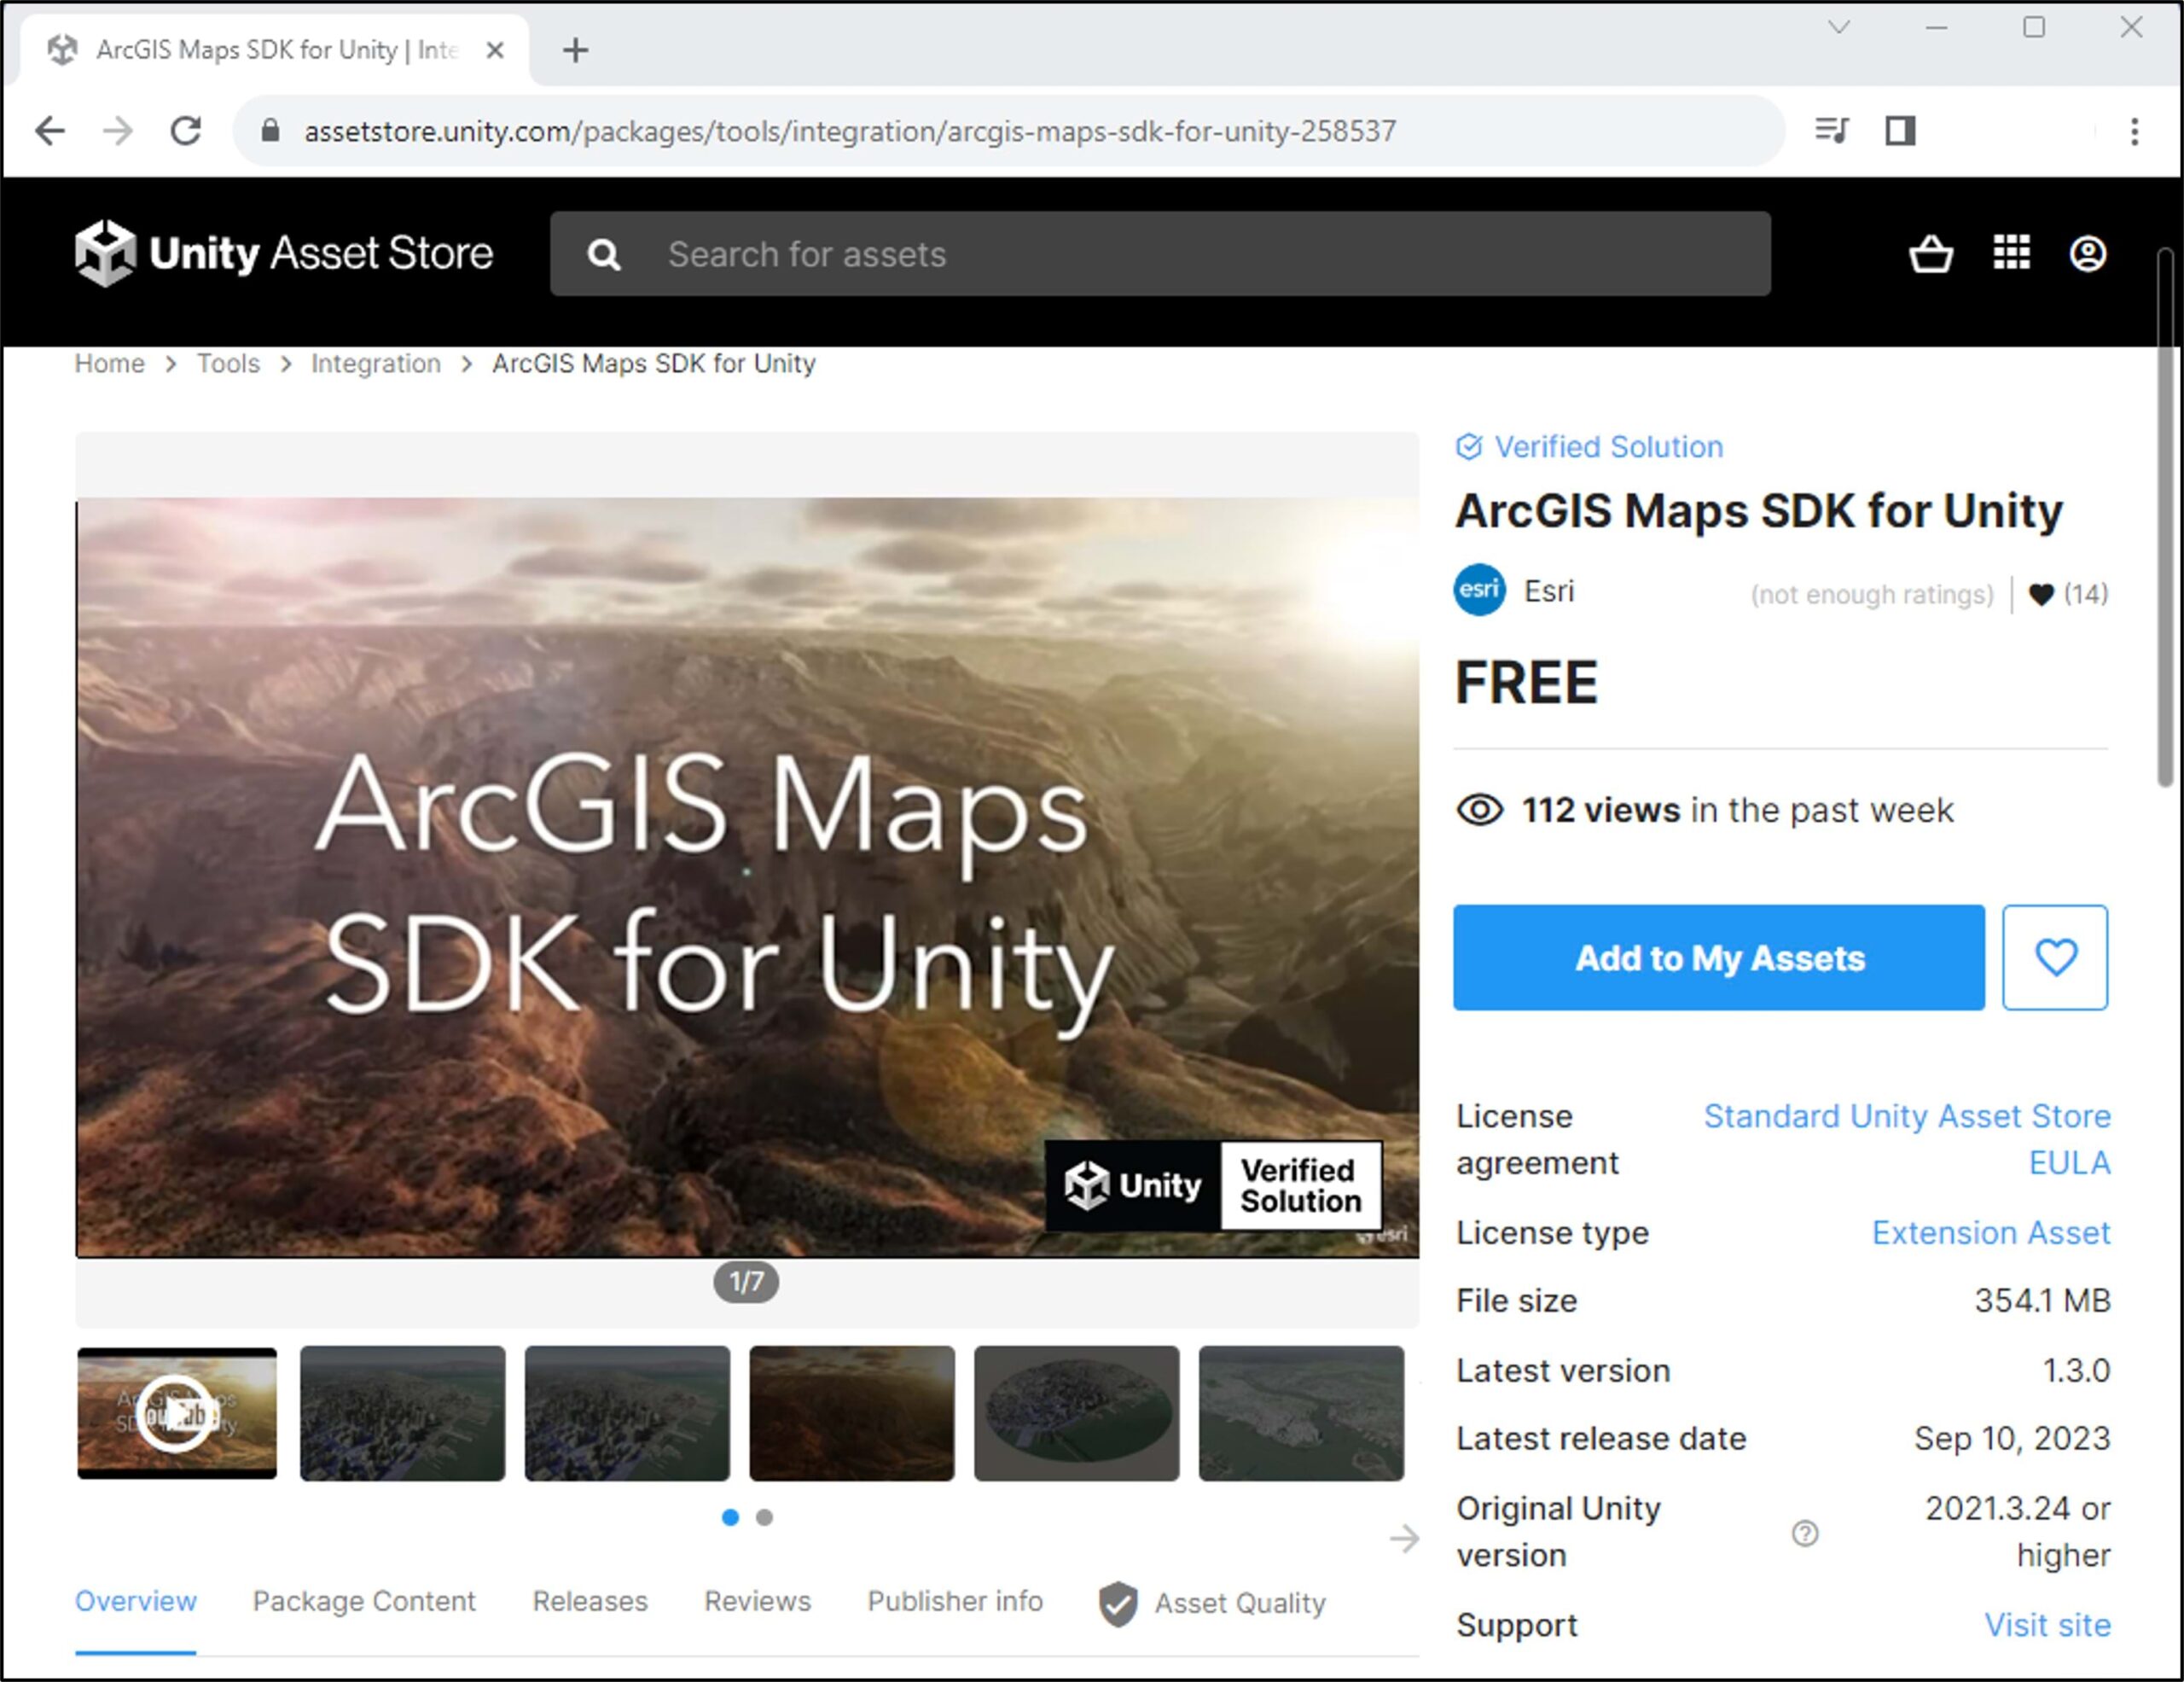 ArcGIS Maps SDK for Unity in the Unity Asset Store